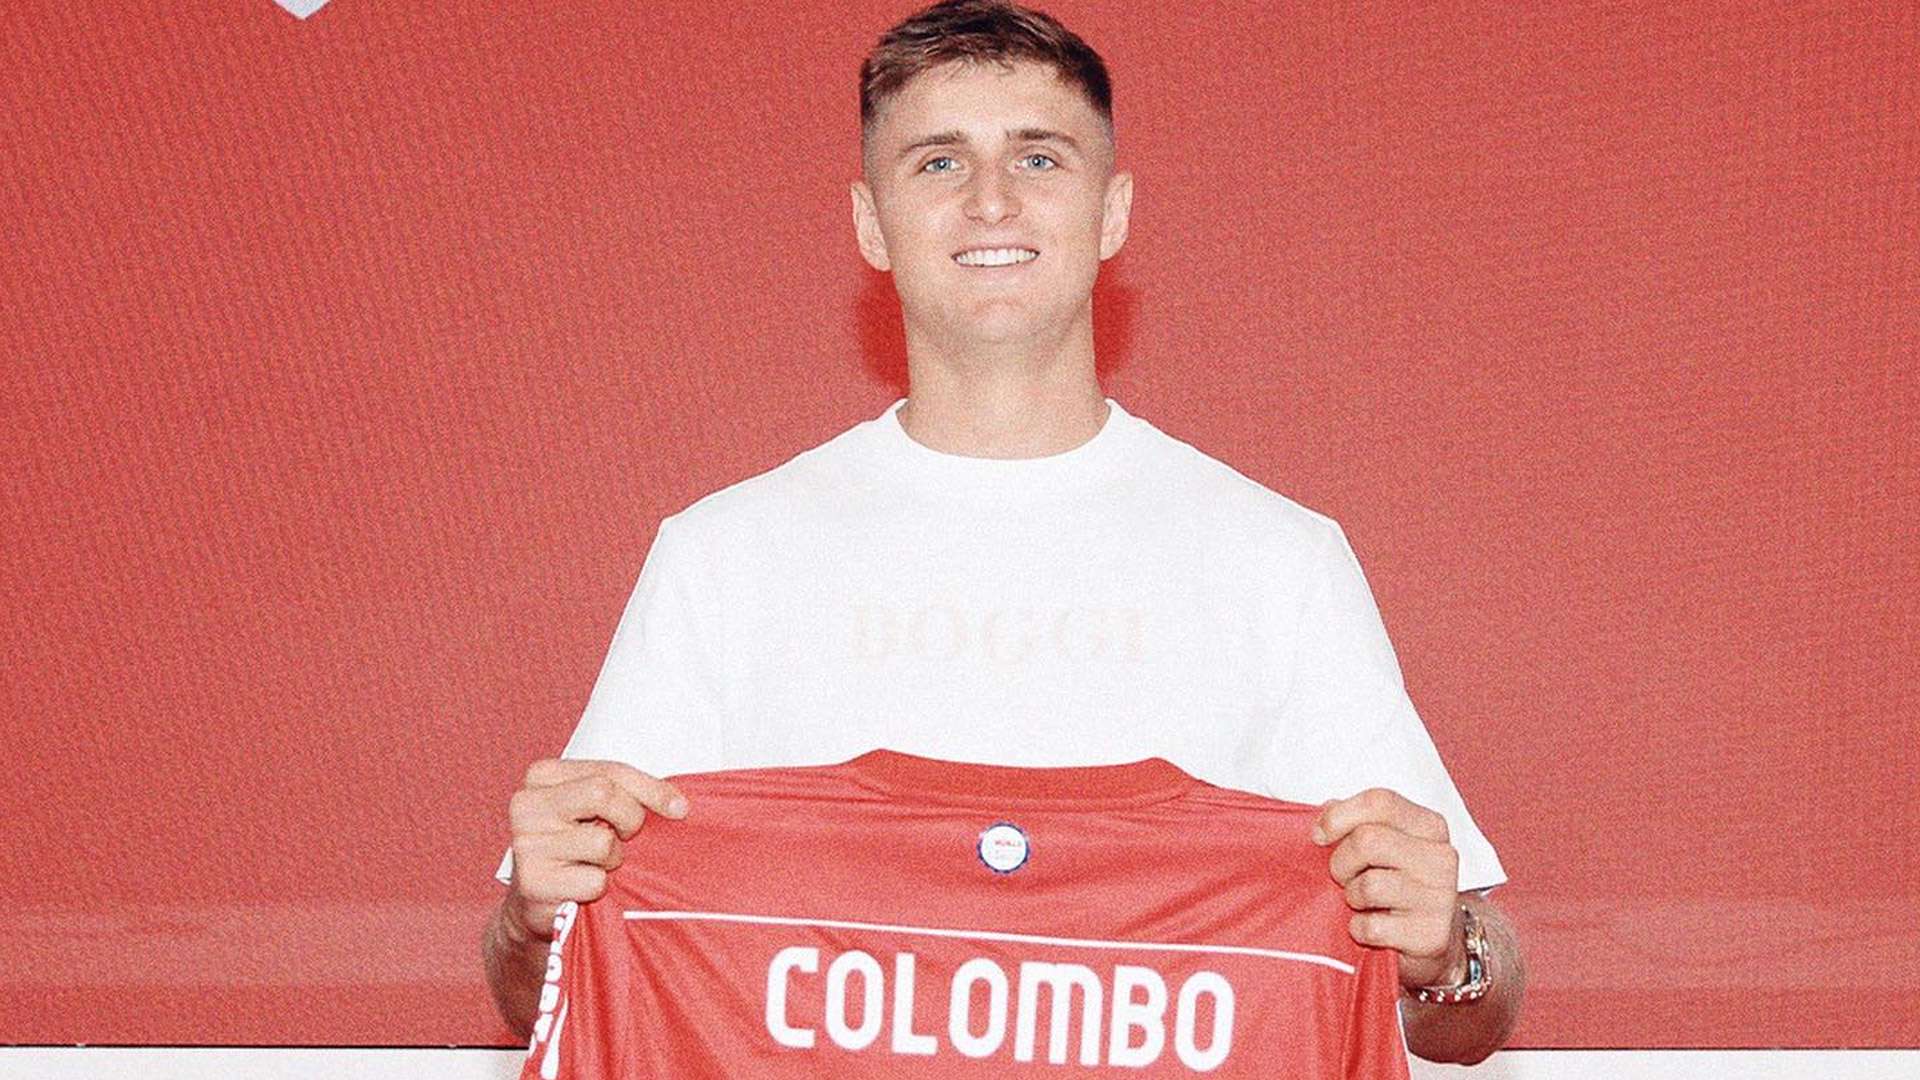 Di Marzio: Colombo to renew Milan contract before joining Monza on loan